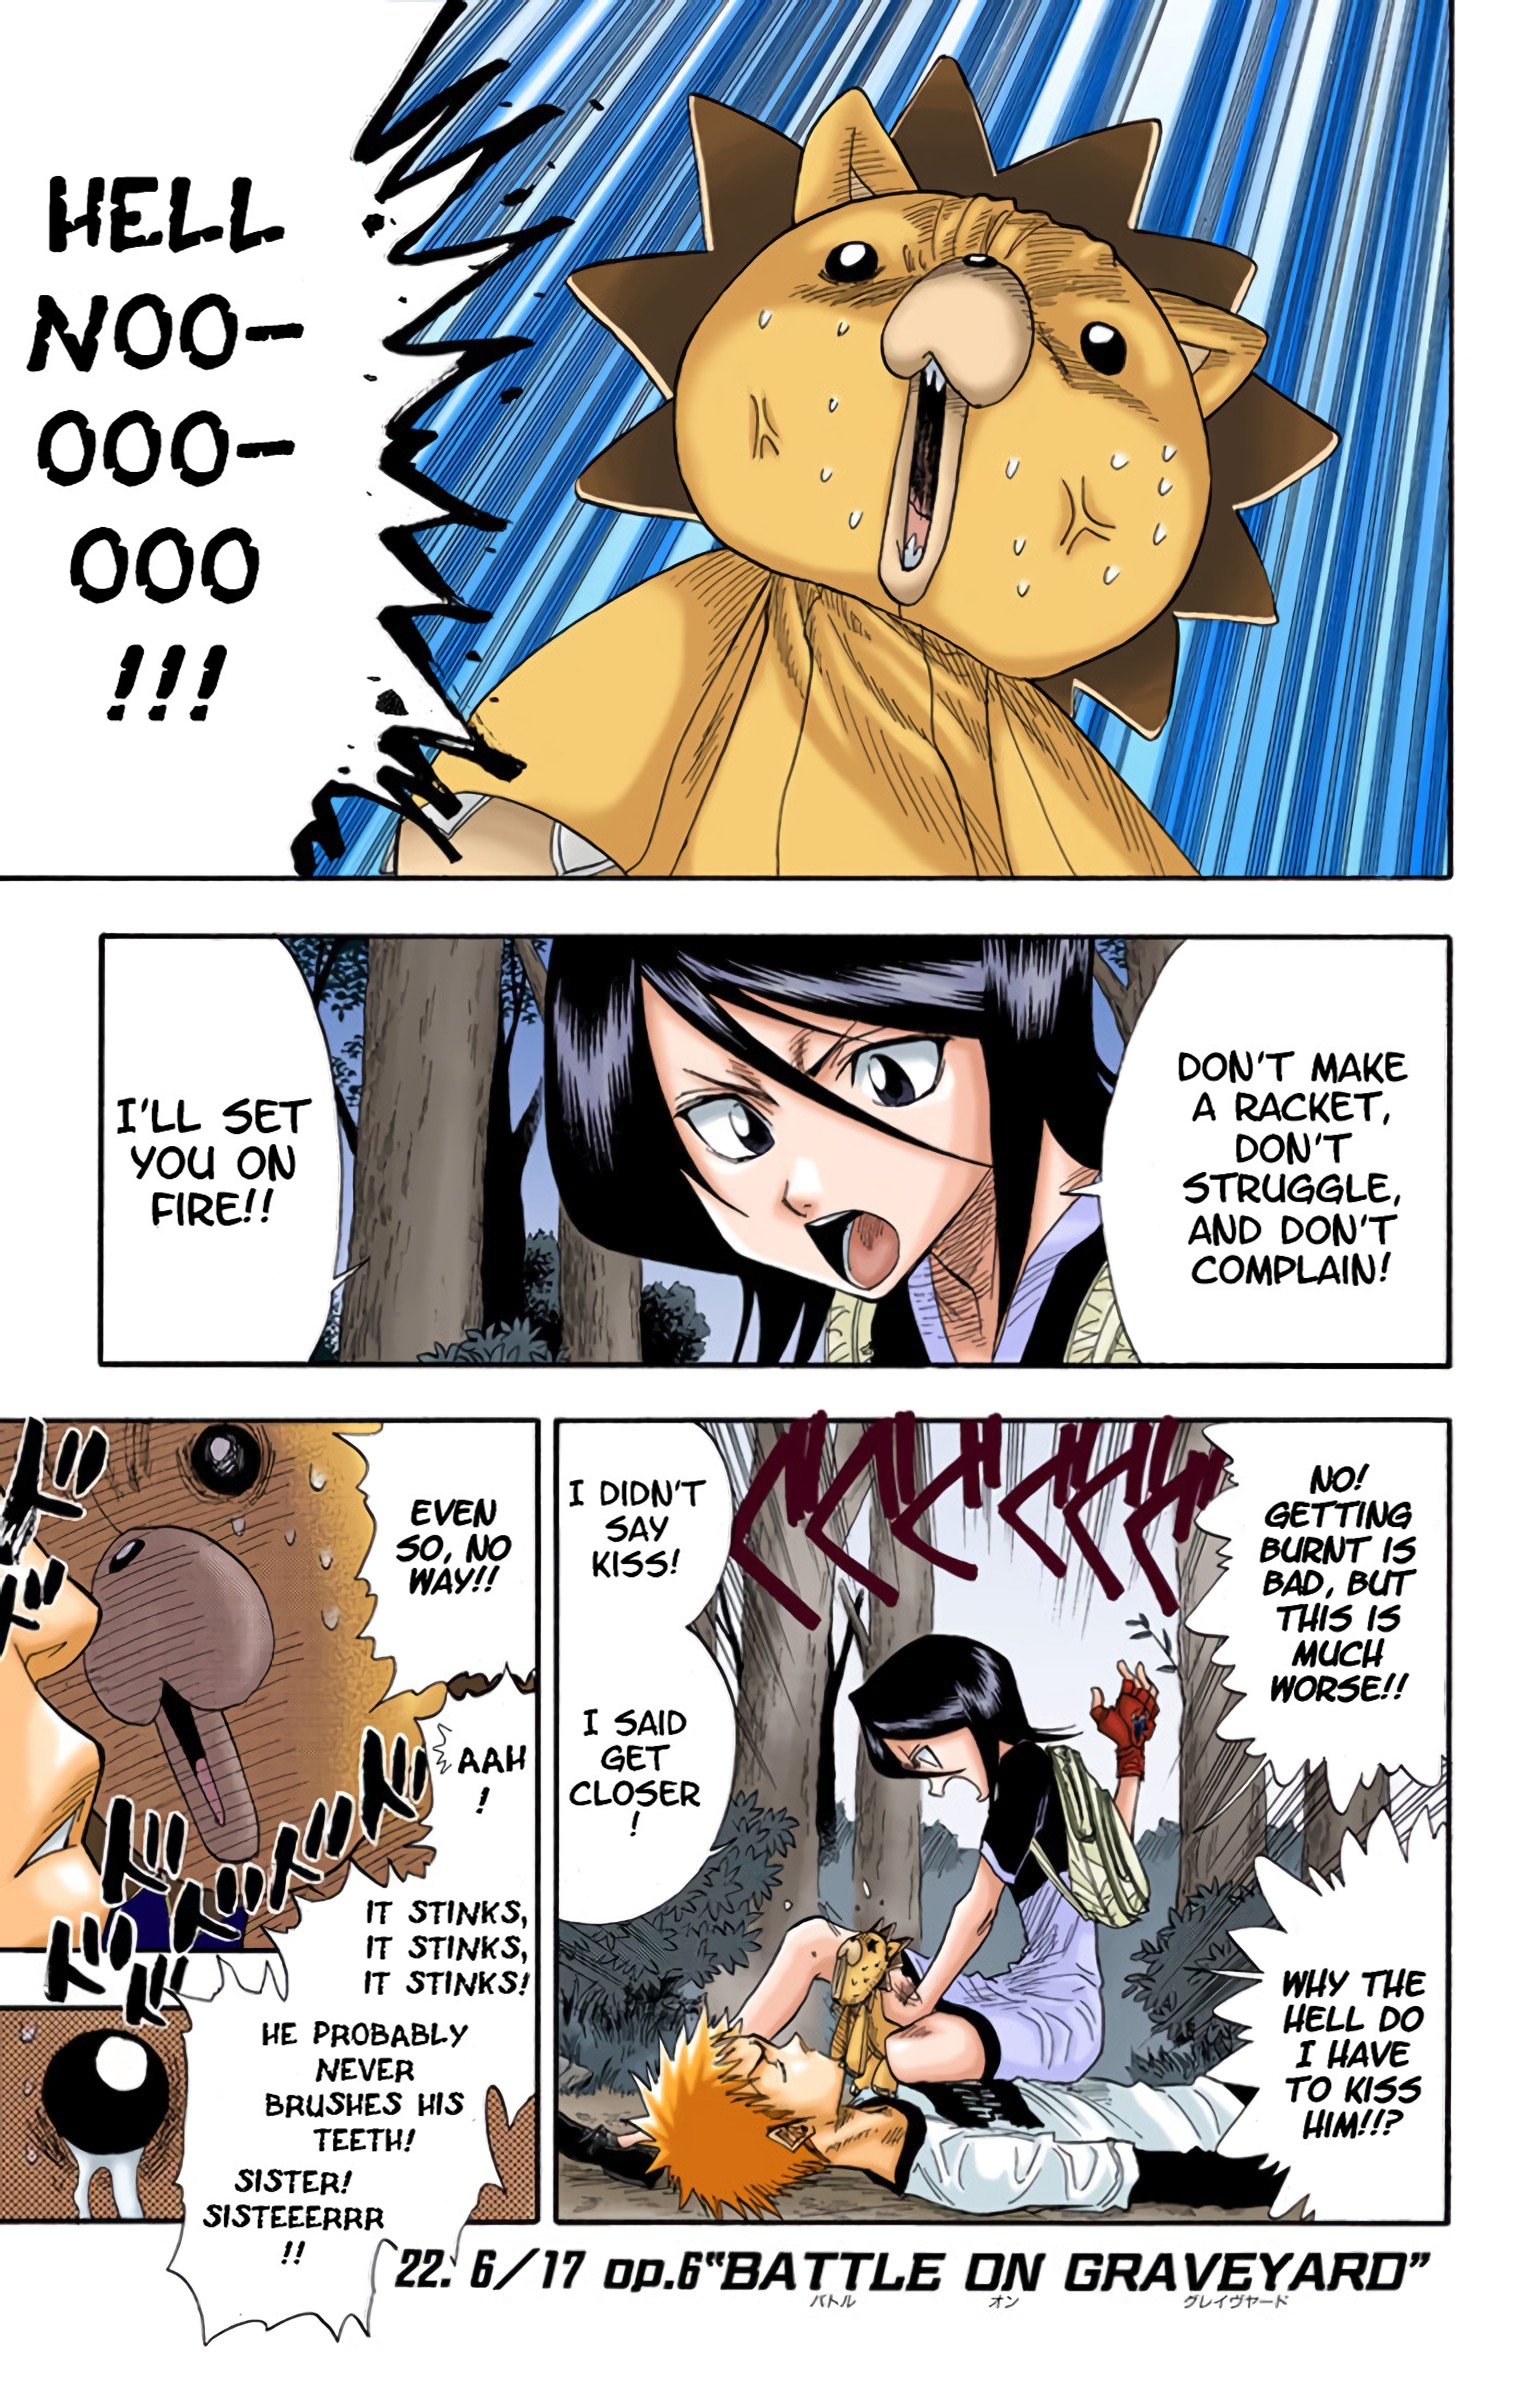 Bleach - Digital Colored Comics Vol.3 Chapter 22: 6/17 Op. 6 A Battle In The Graveyard - Picture 1